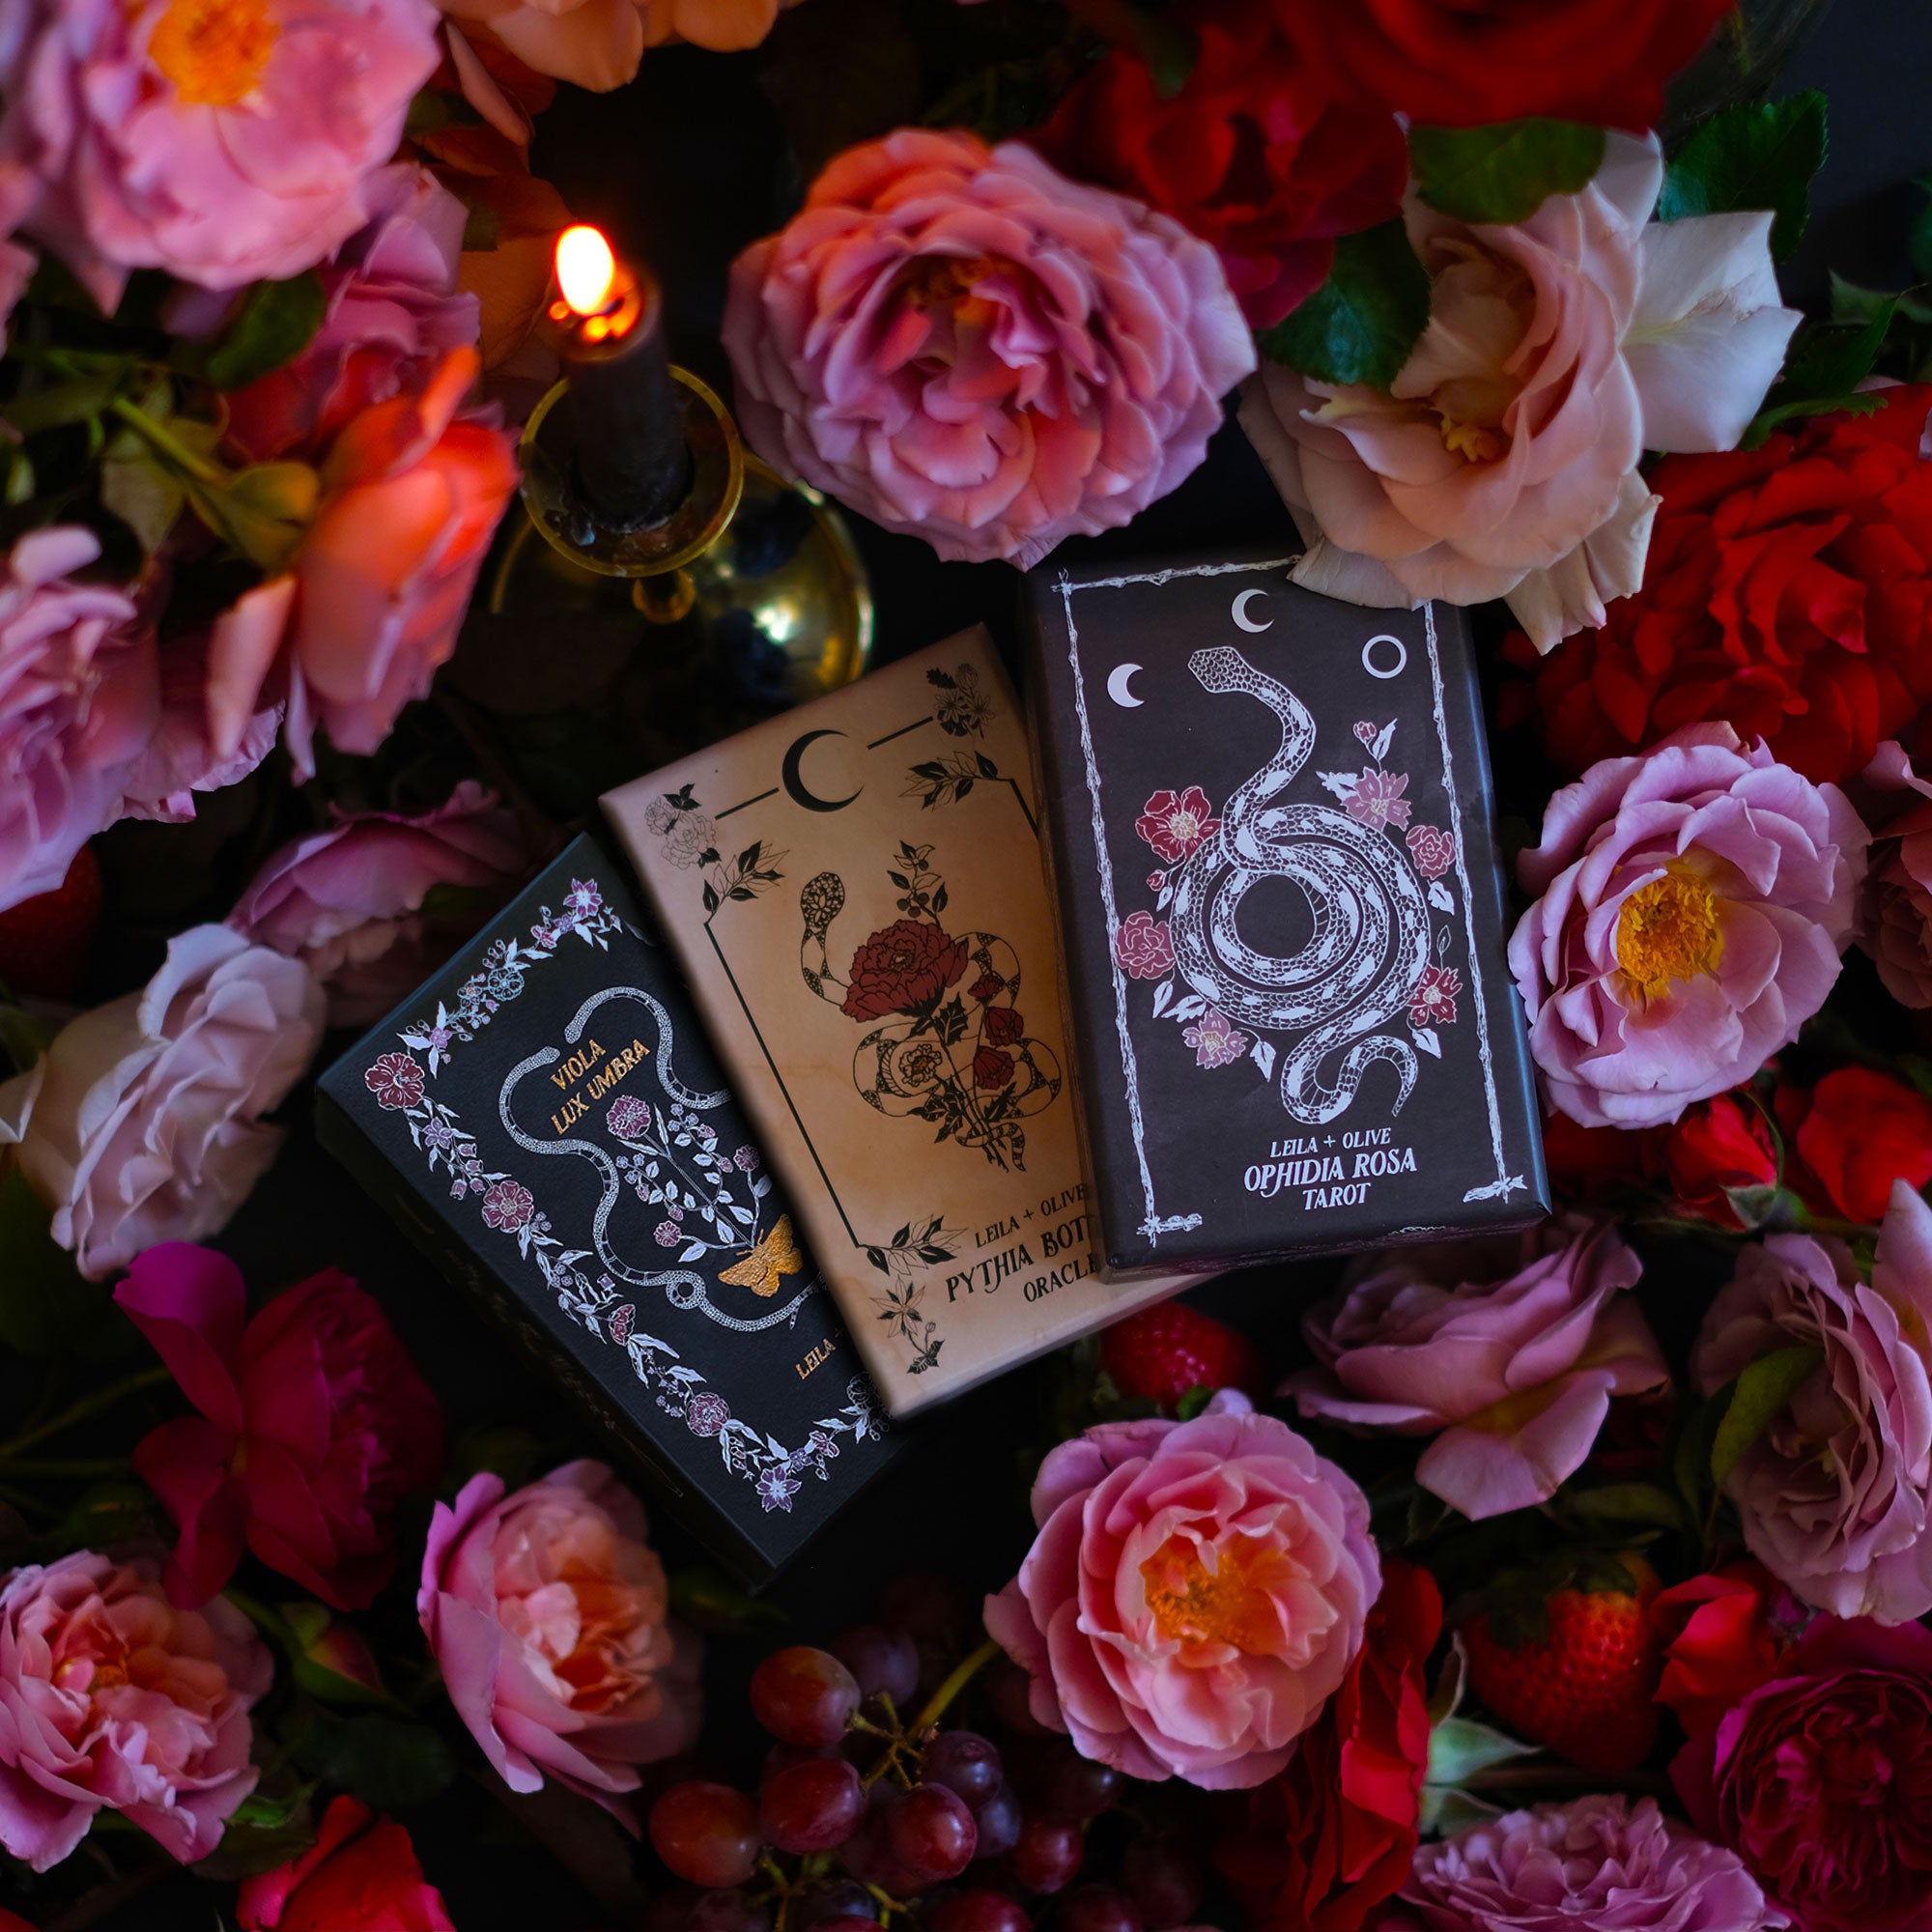 Botanical Tarot deck and Botanical Oracle card deck, illustrated and painted by hand. Each of these botanical and flora inspired, intuitive tarot decks delves into the garden and the natural world while remaining rooted in mythology and tradition.